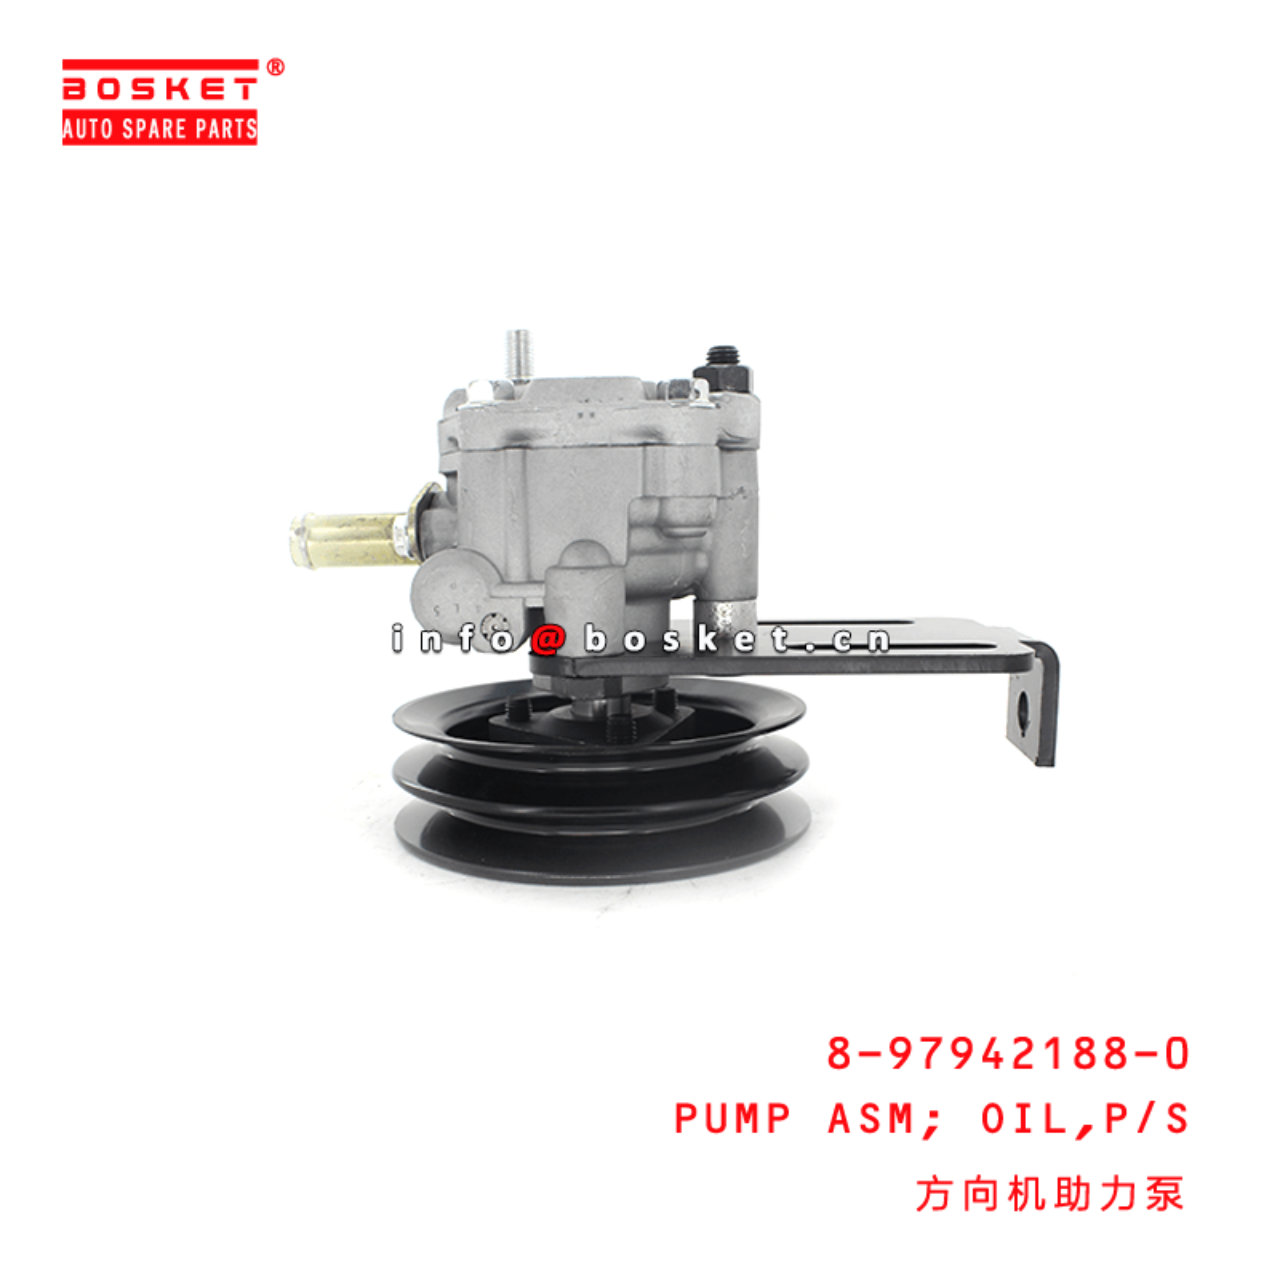 8-97942188-0 Power Steering Oil Pump Assembly 8979421880 Suitable for ISUZU D-MAX 4JA1 4JH1